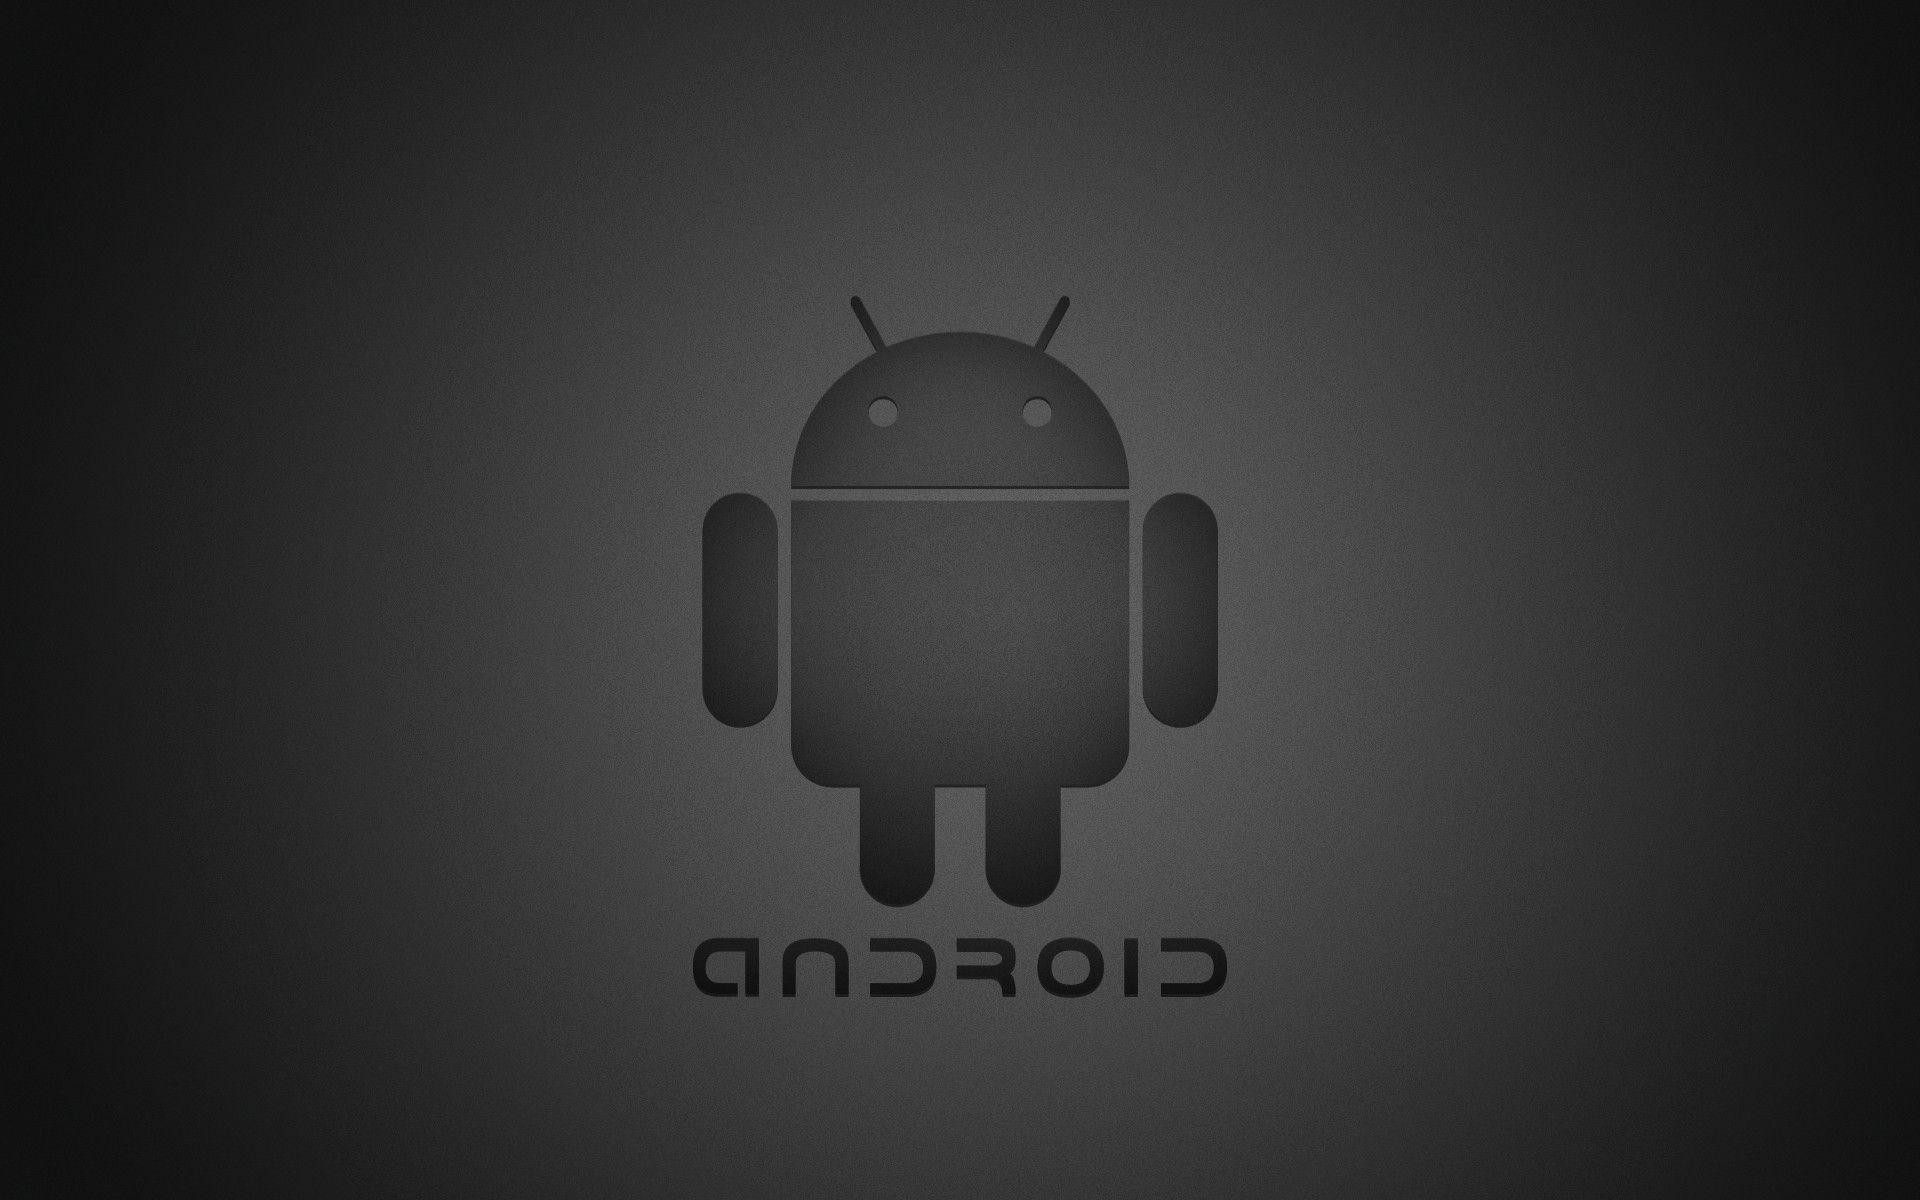 3D android logo wallpaper by cheko89 - Download on ZEDGE™ | b062